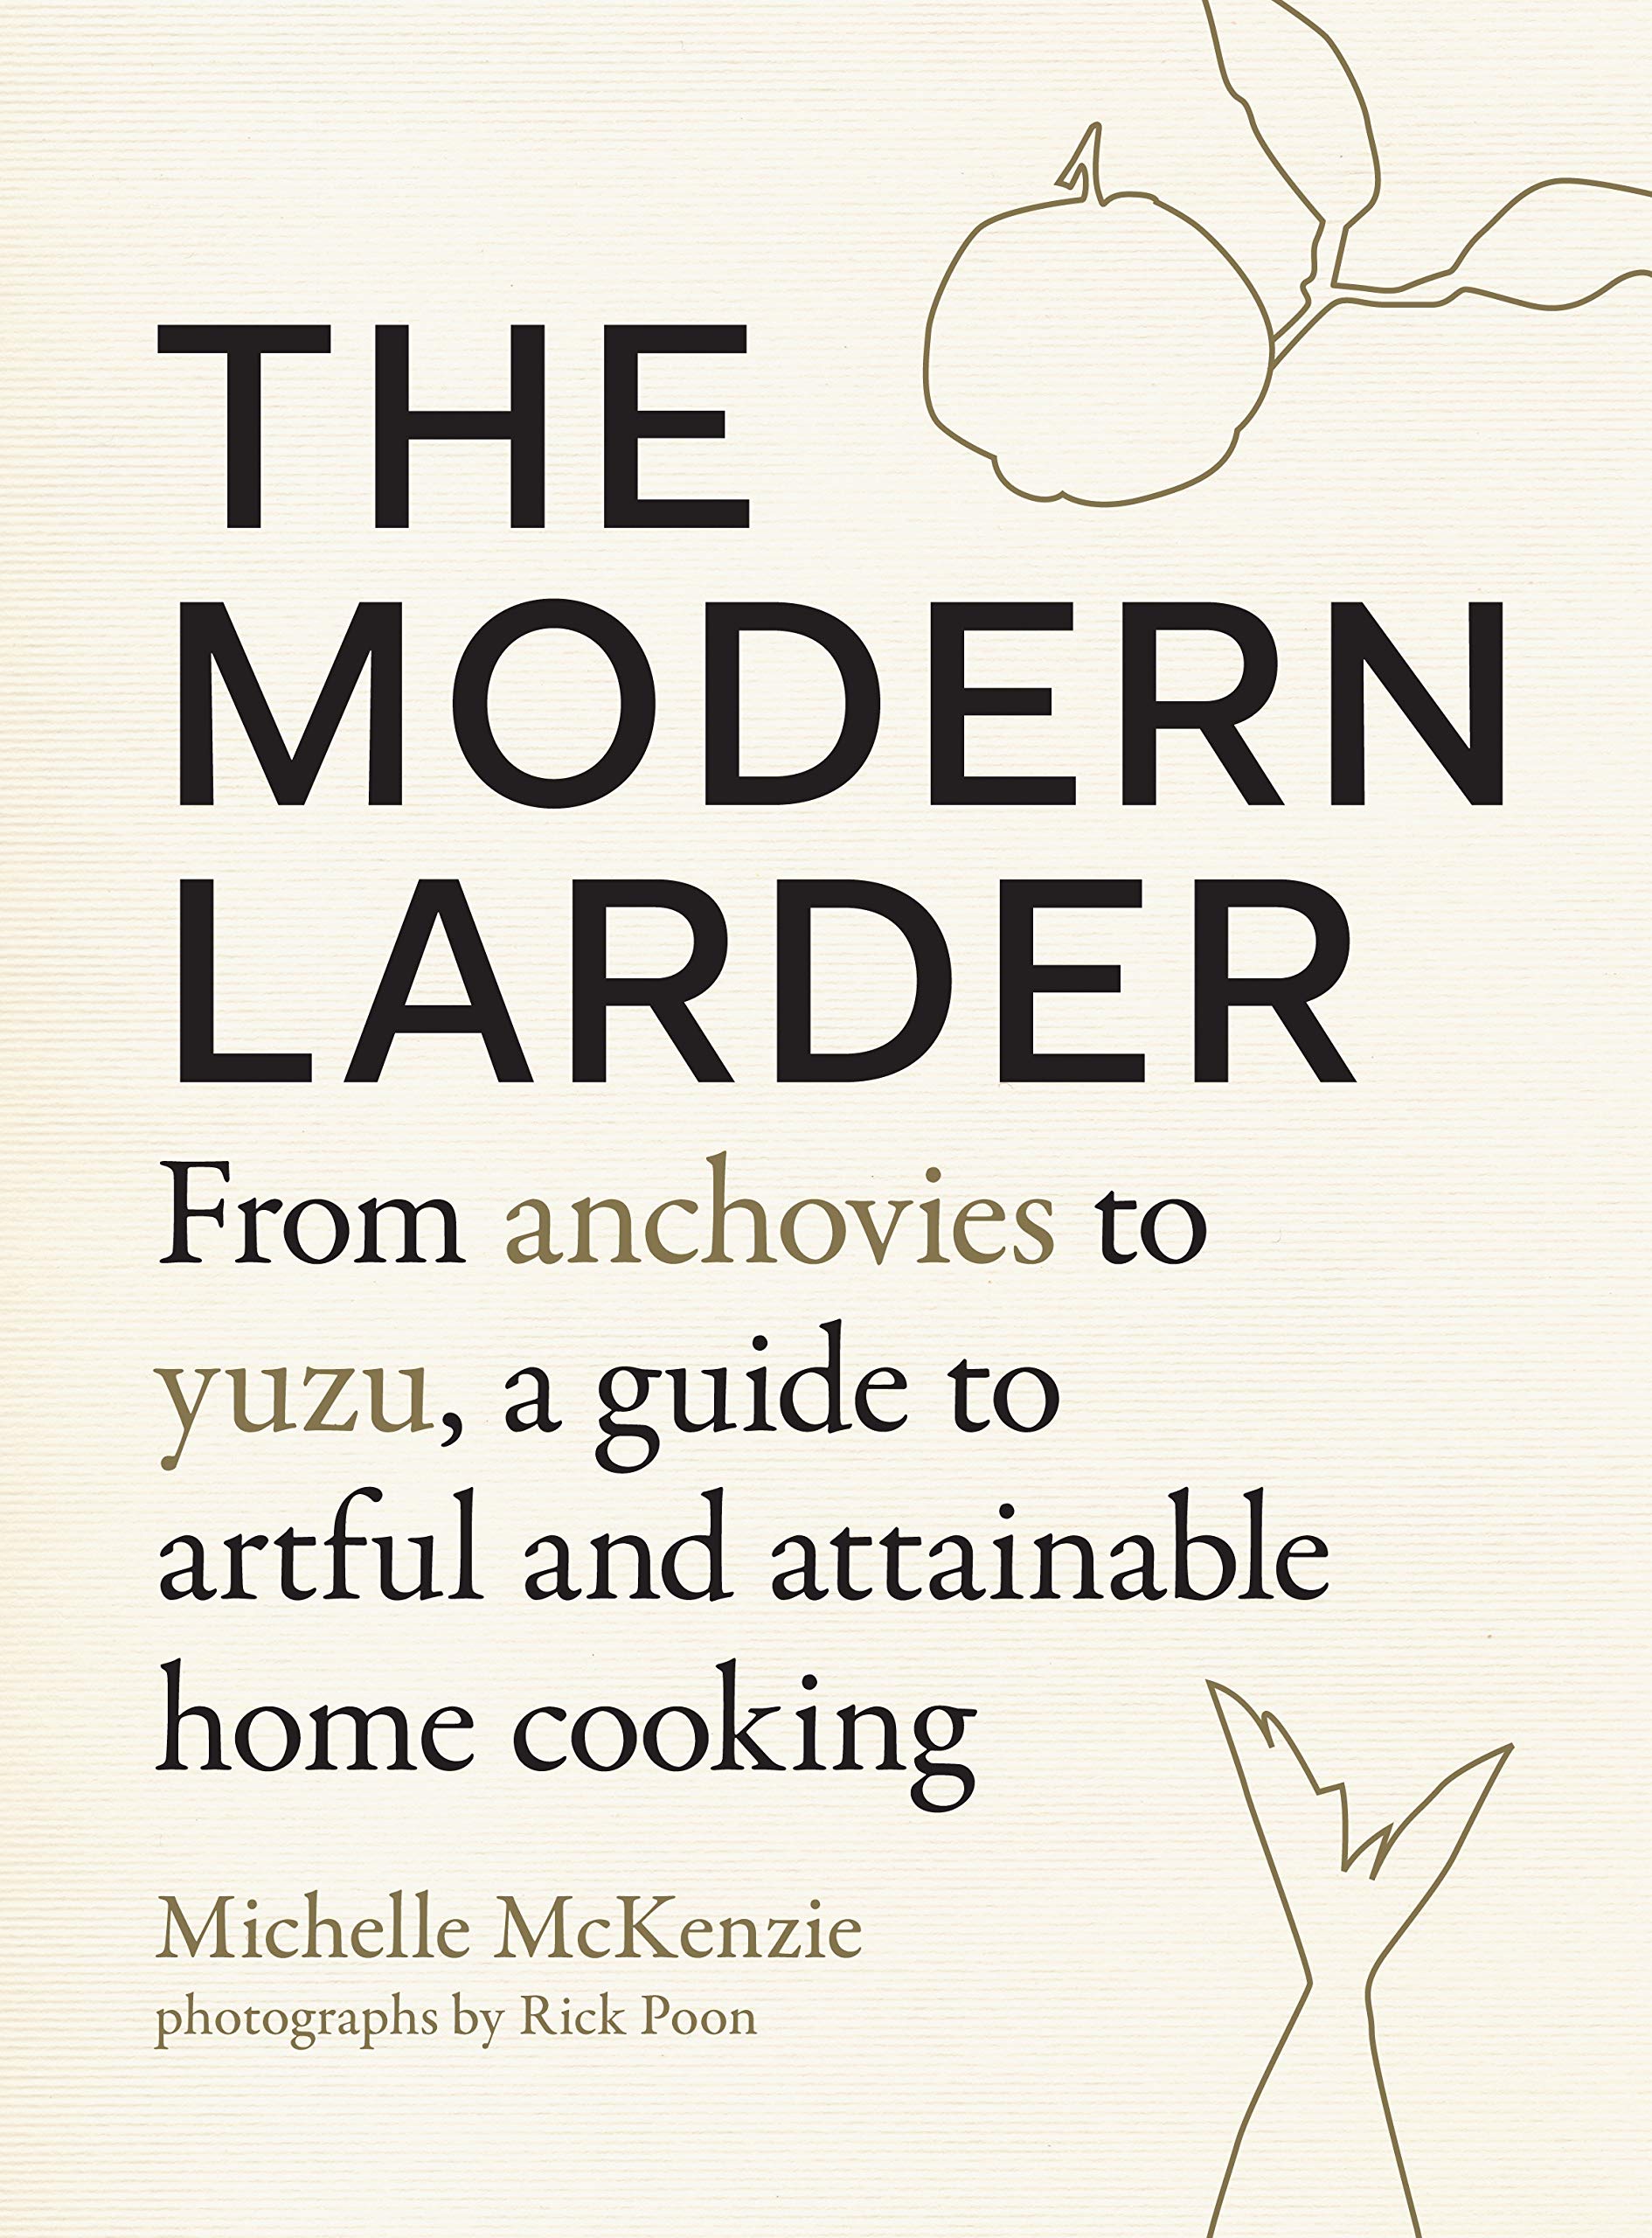 The Modern Larder: From Anchovies to Yuzu, a Guide to Artful and Attainable Home Cooking (Michelle McKenzie)